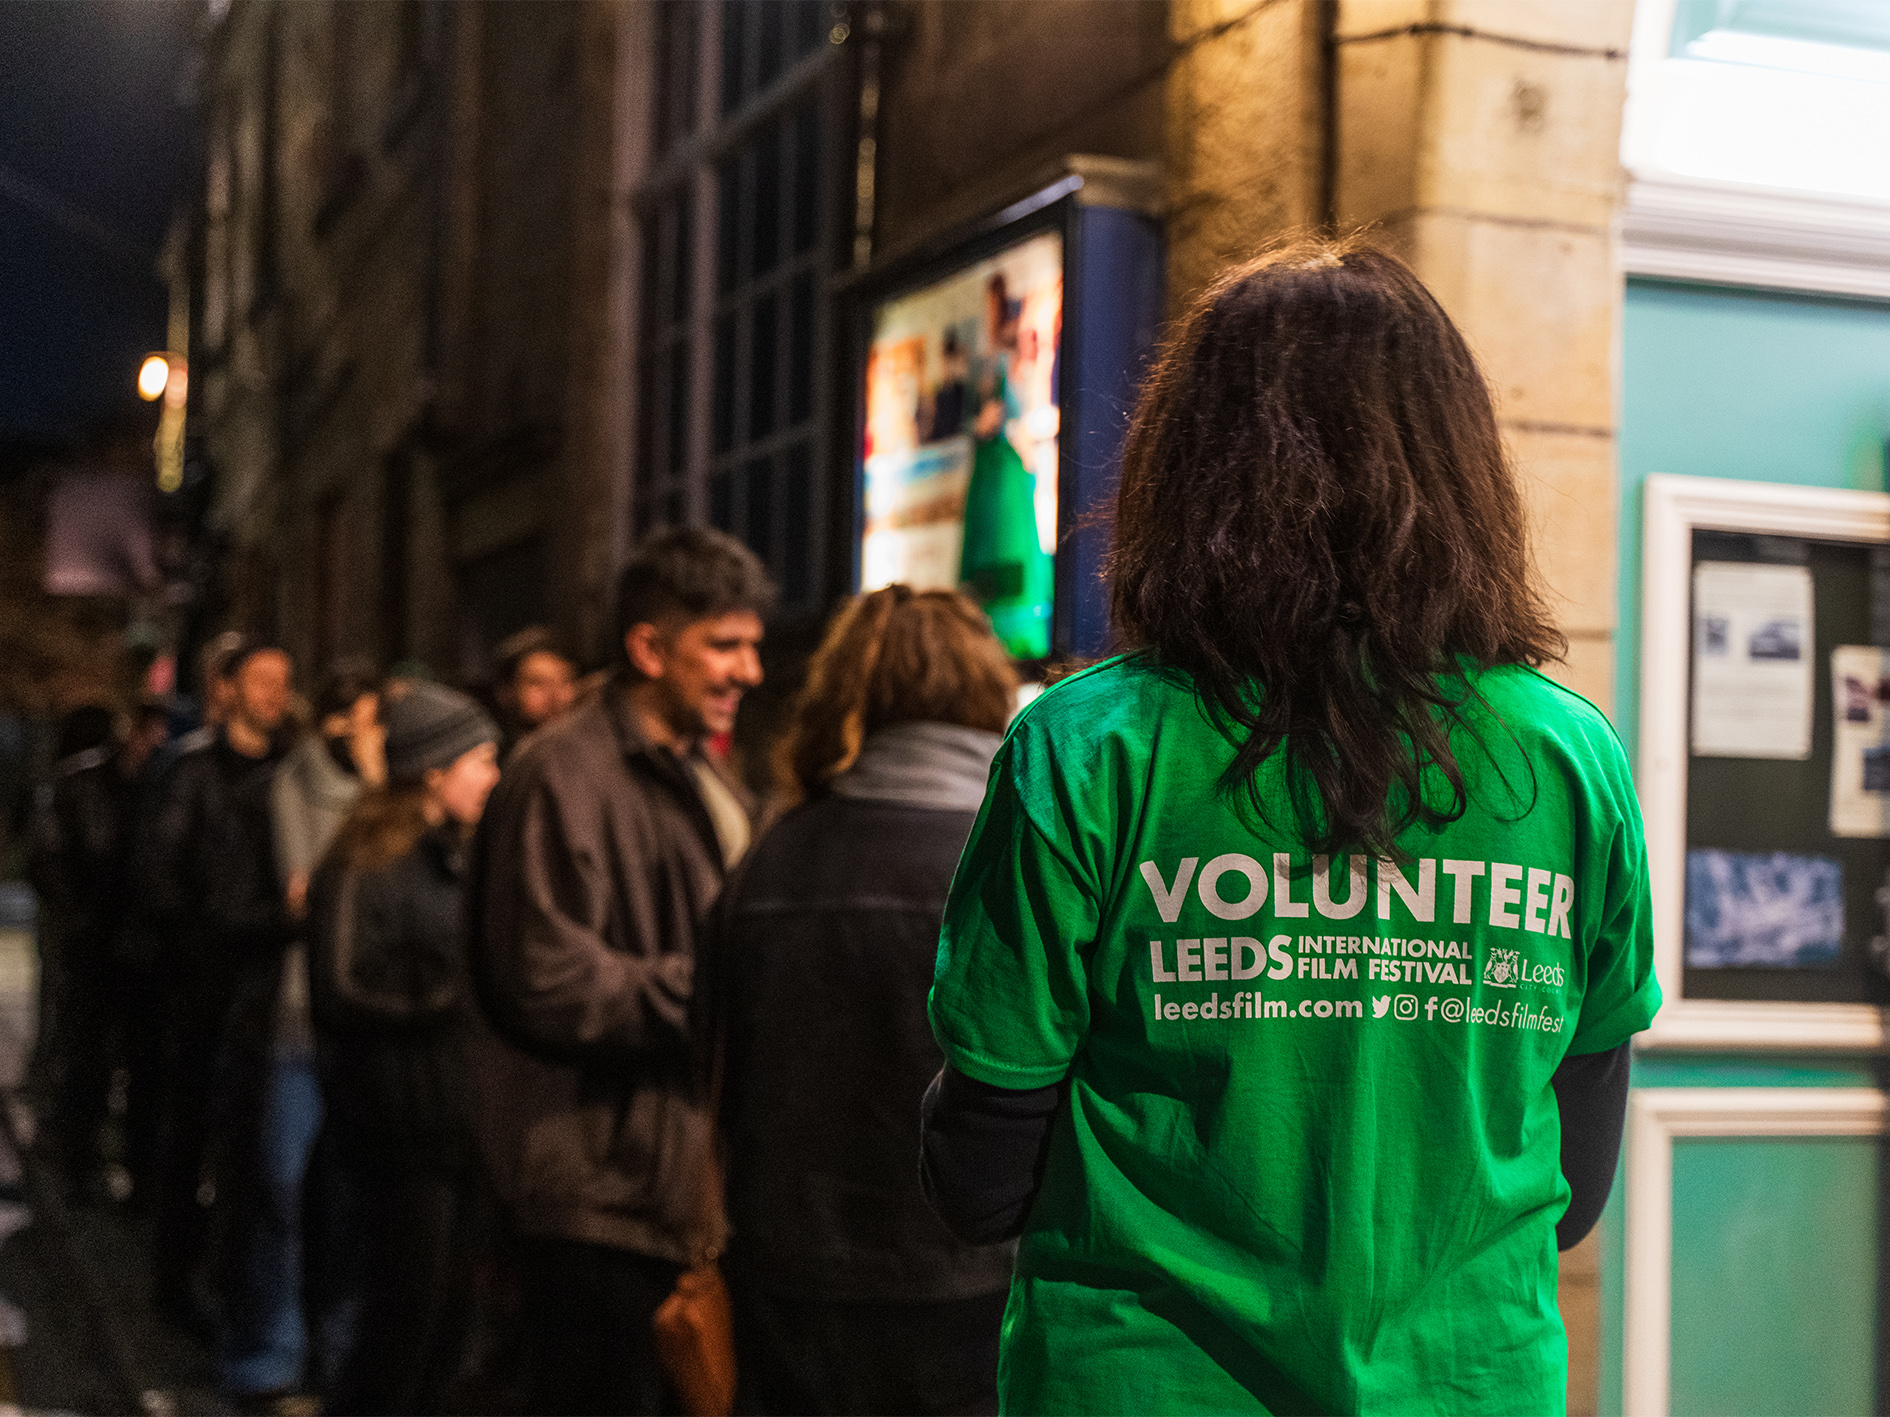 A young person can be seen from behind with "VOLUNTEER" written on their T-Shirt. A line of people queuing up for a venue stand in front of them. 